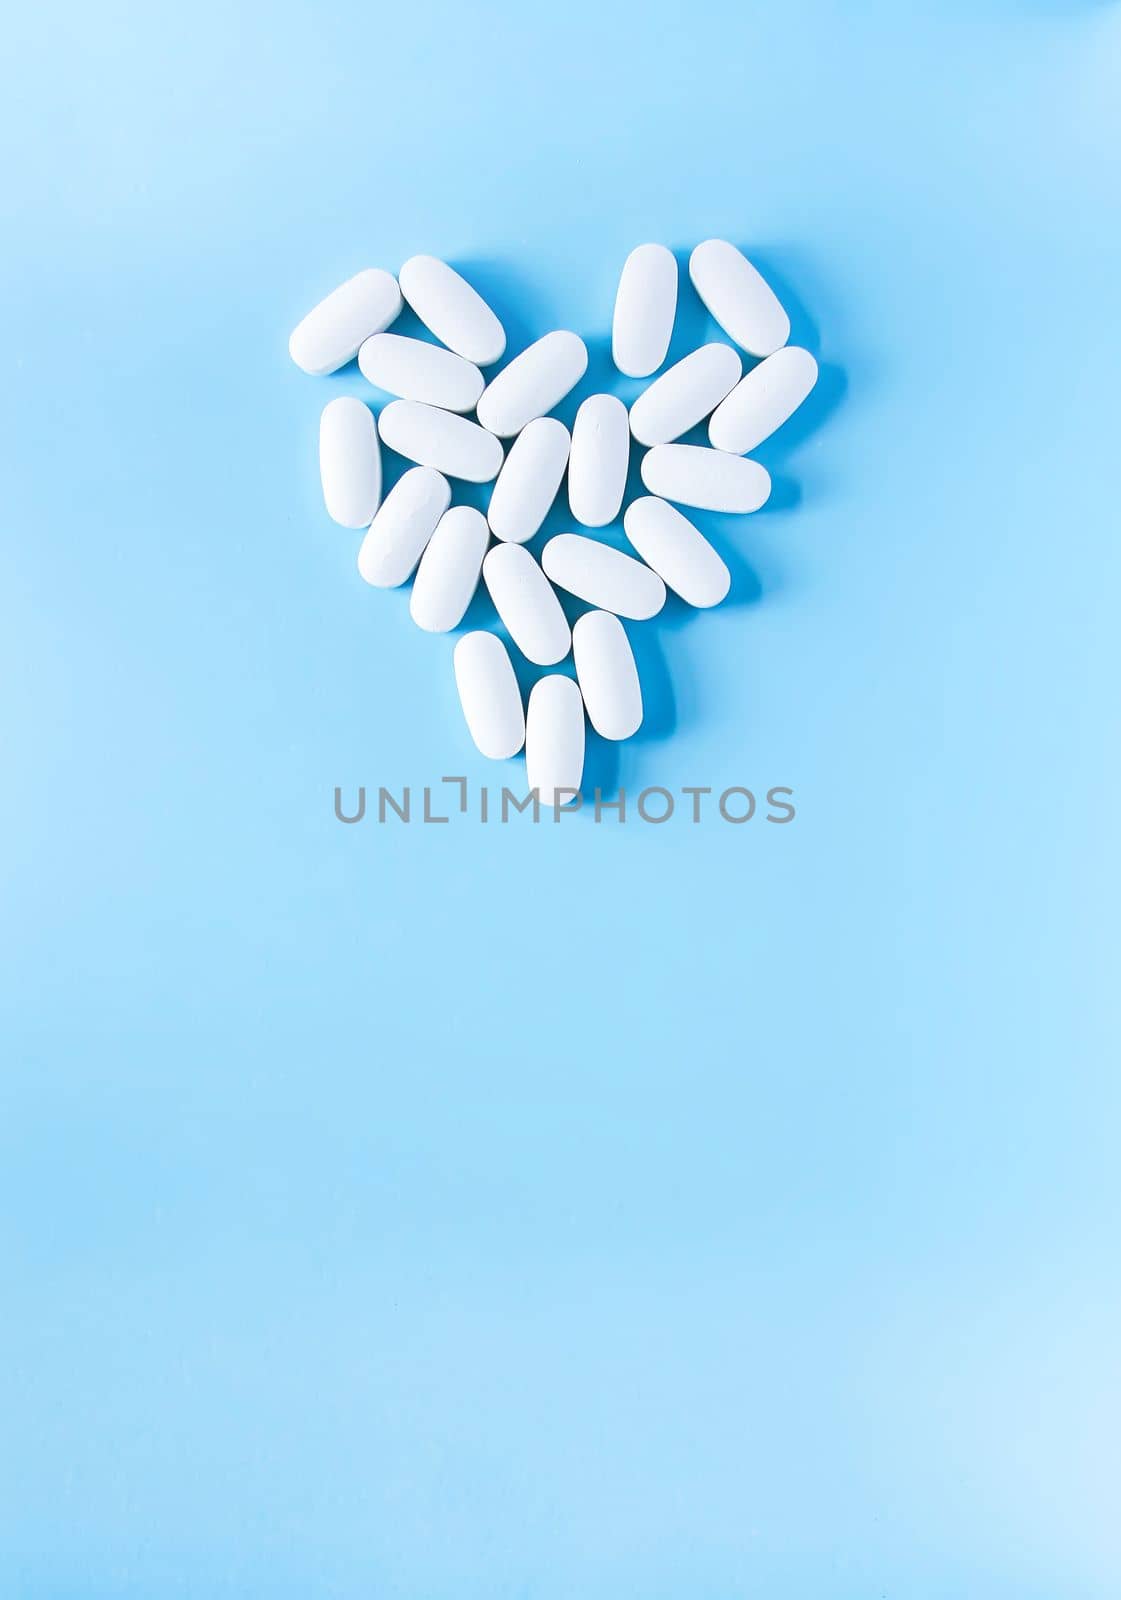 Pills of vitamin in the shape of heart on soft blue background